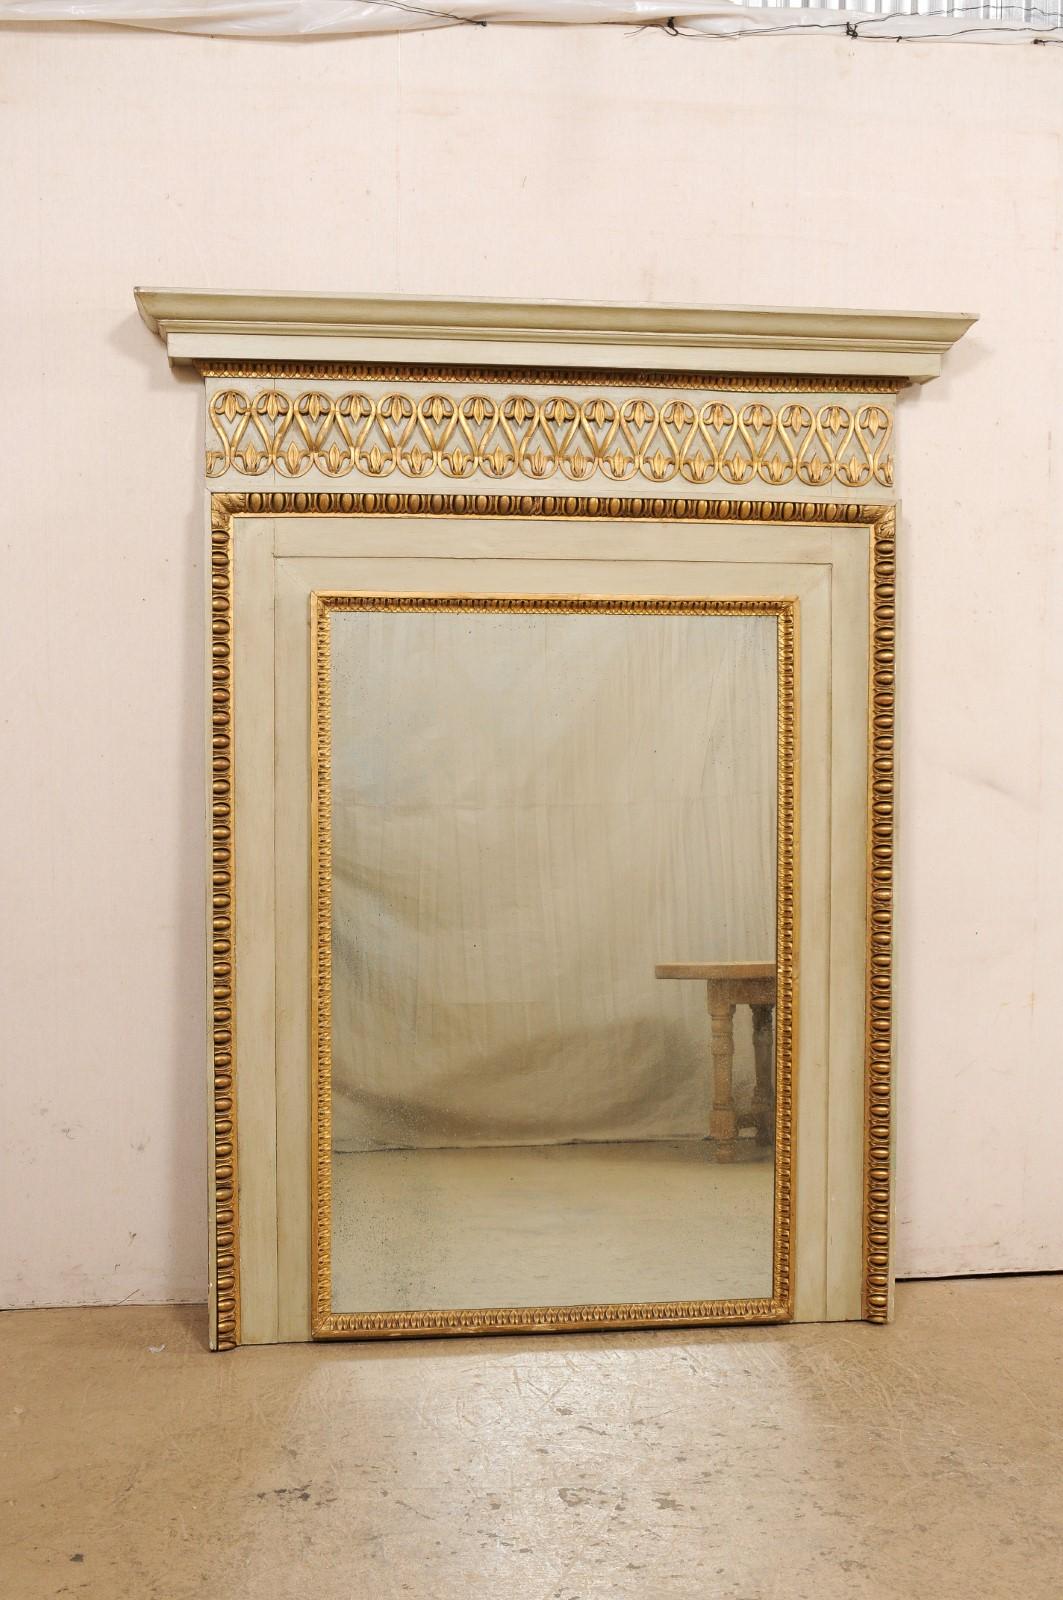 A French painted and carved wood trumeau-style mirror from the mid 20th century. This mid-century mirror from France, has a vertical-rectangular shape, and features a nicely molded upper cornice, elegant trimmings in gilt with a undulating pattern